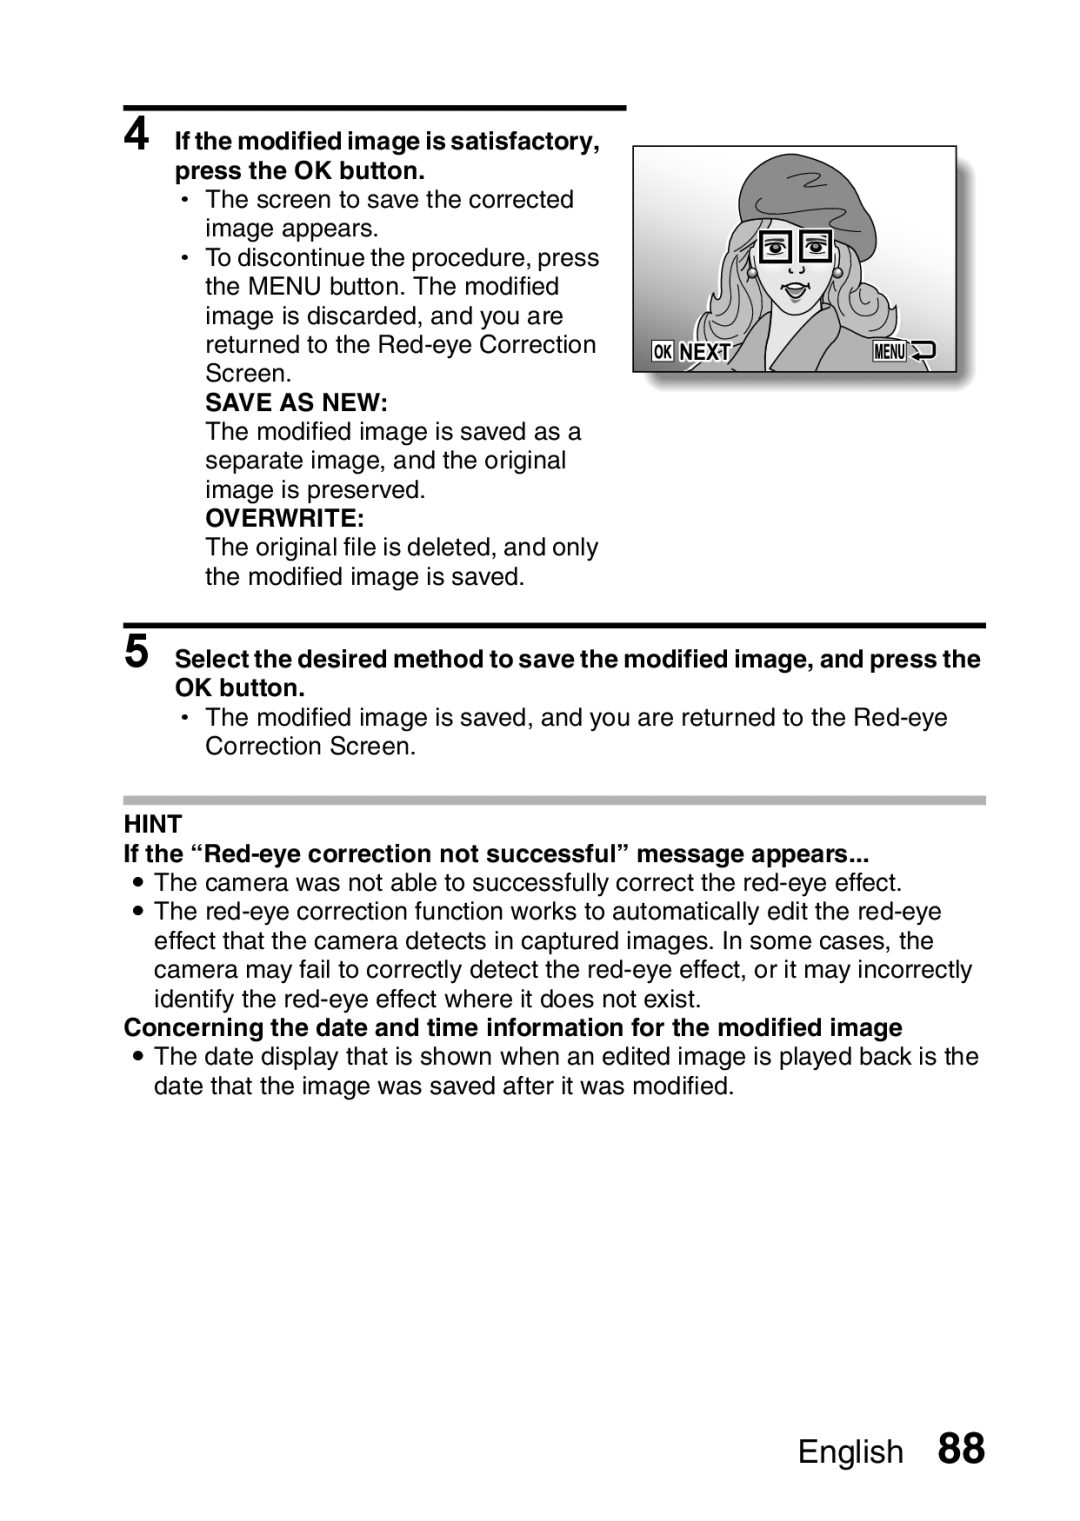 Samsung R50 instruction manual English, If the modified image is satisfactory, press the OK button, Save As New, Overwrite 